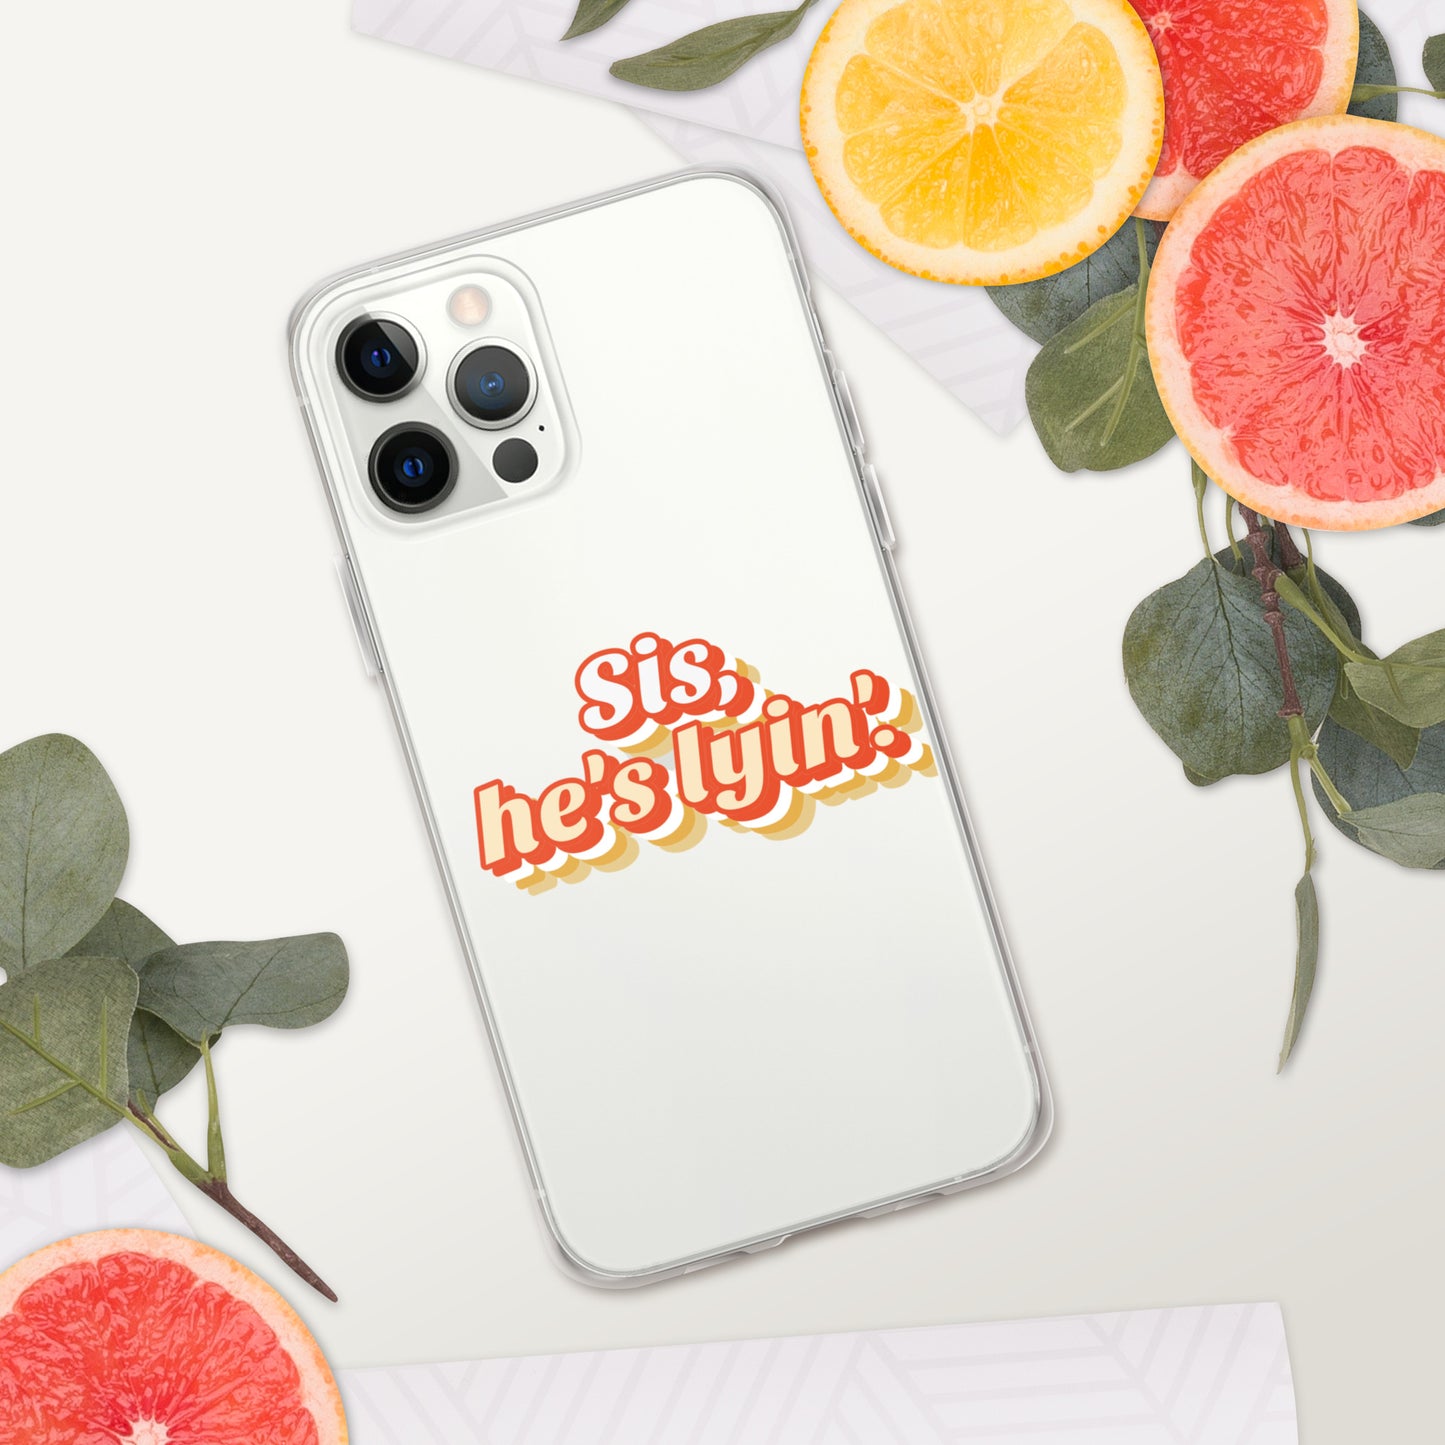 SIS, HE'S LYIN' Clear Case for iPhone®